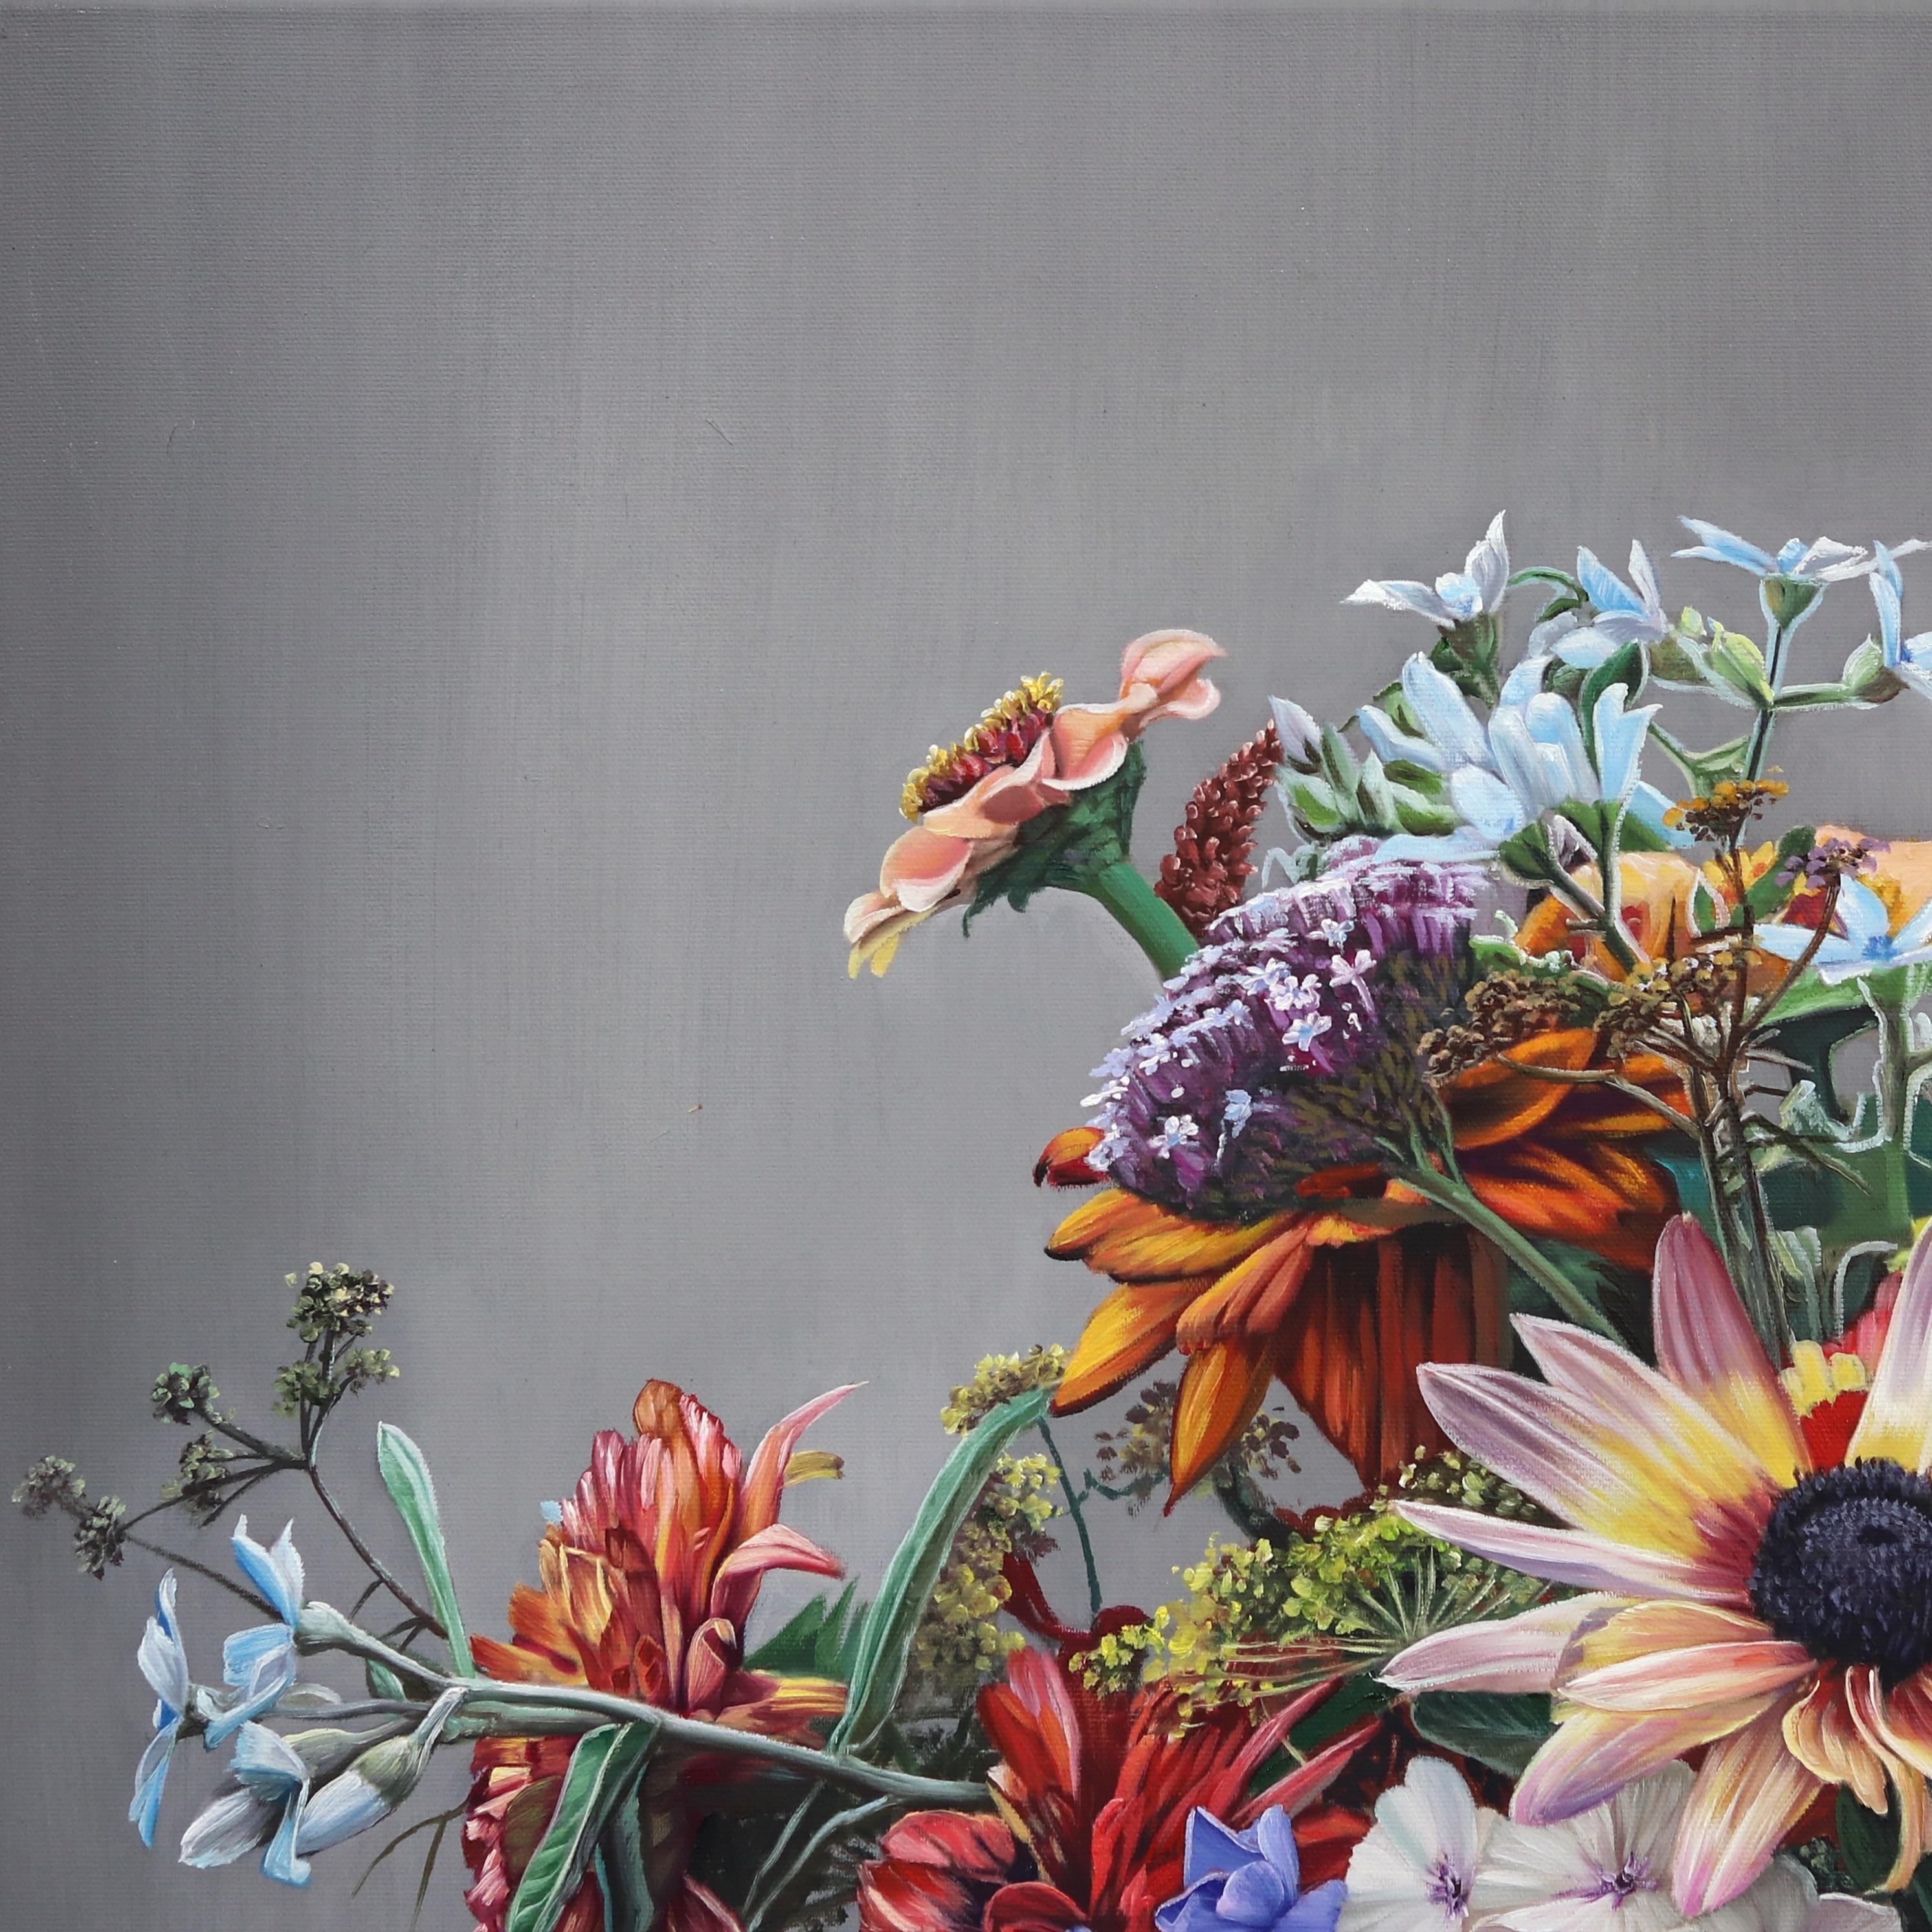 Touching Souls - Hyperrealist Floral Still Life Oil Painting - Gray Figurative Painting by Katharina Husslein